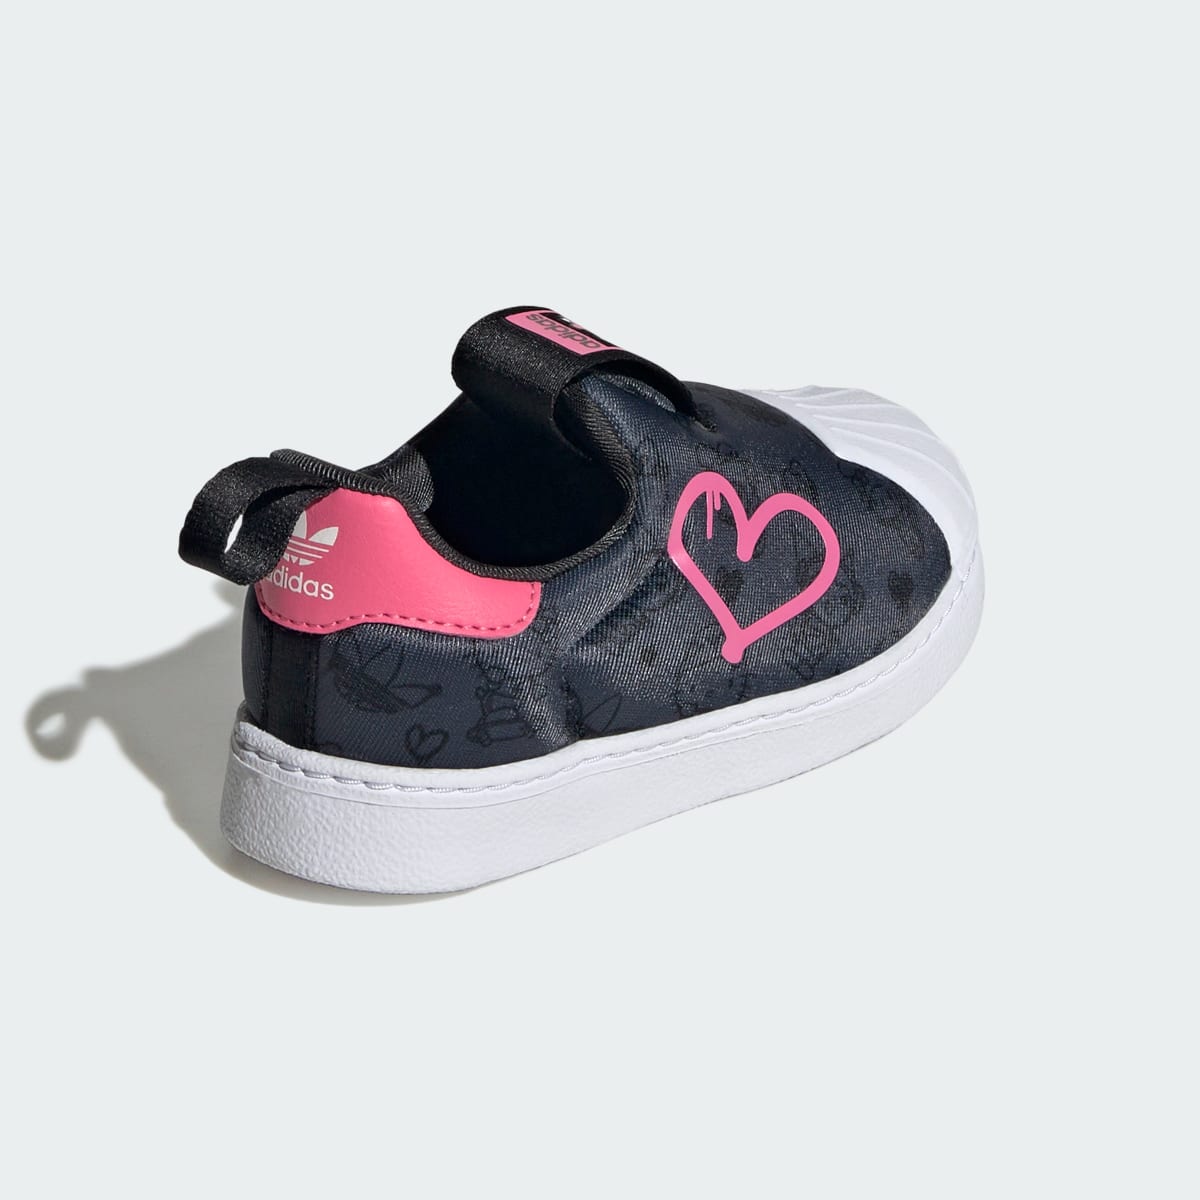 Adidas Originals x Hello Kitty and Friends Superstar 360 Shoes Kids. 6